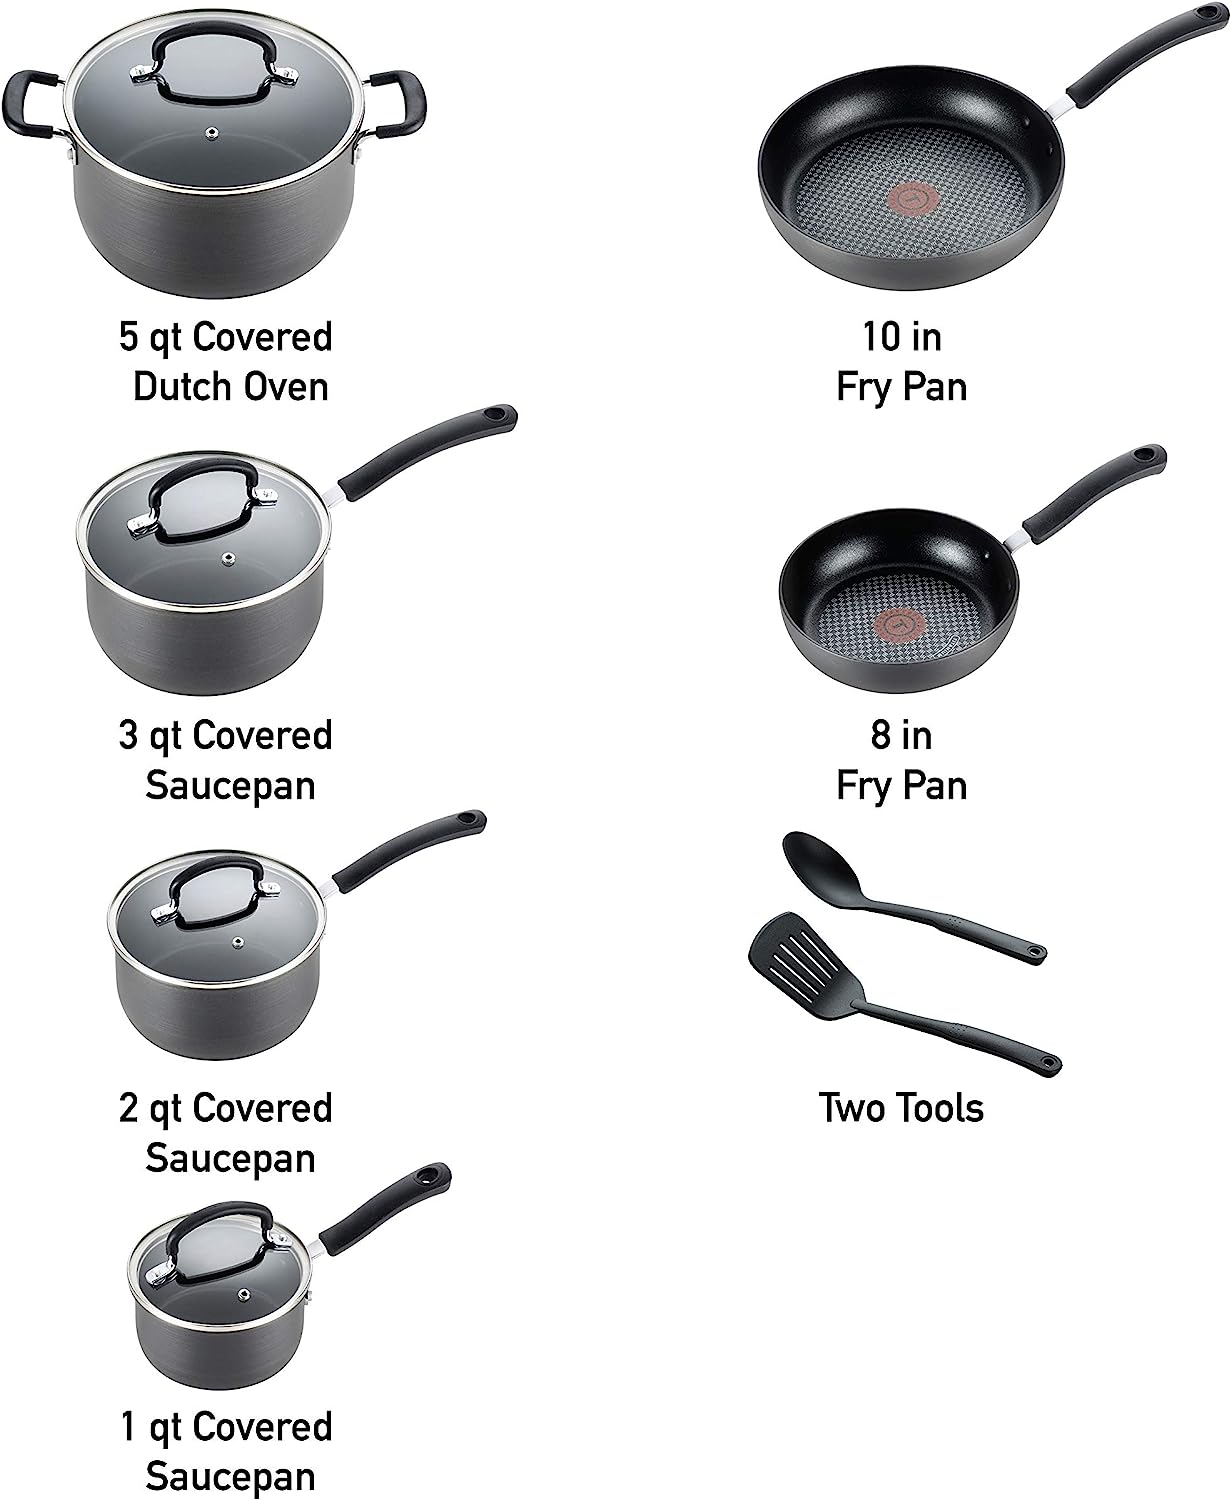 T-fal Ultimate Hard Anodized Nonstick Fry Pan Set 10, 12 Inch Cookware,  Pots and Pans, Dishwasher Safe Grey